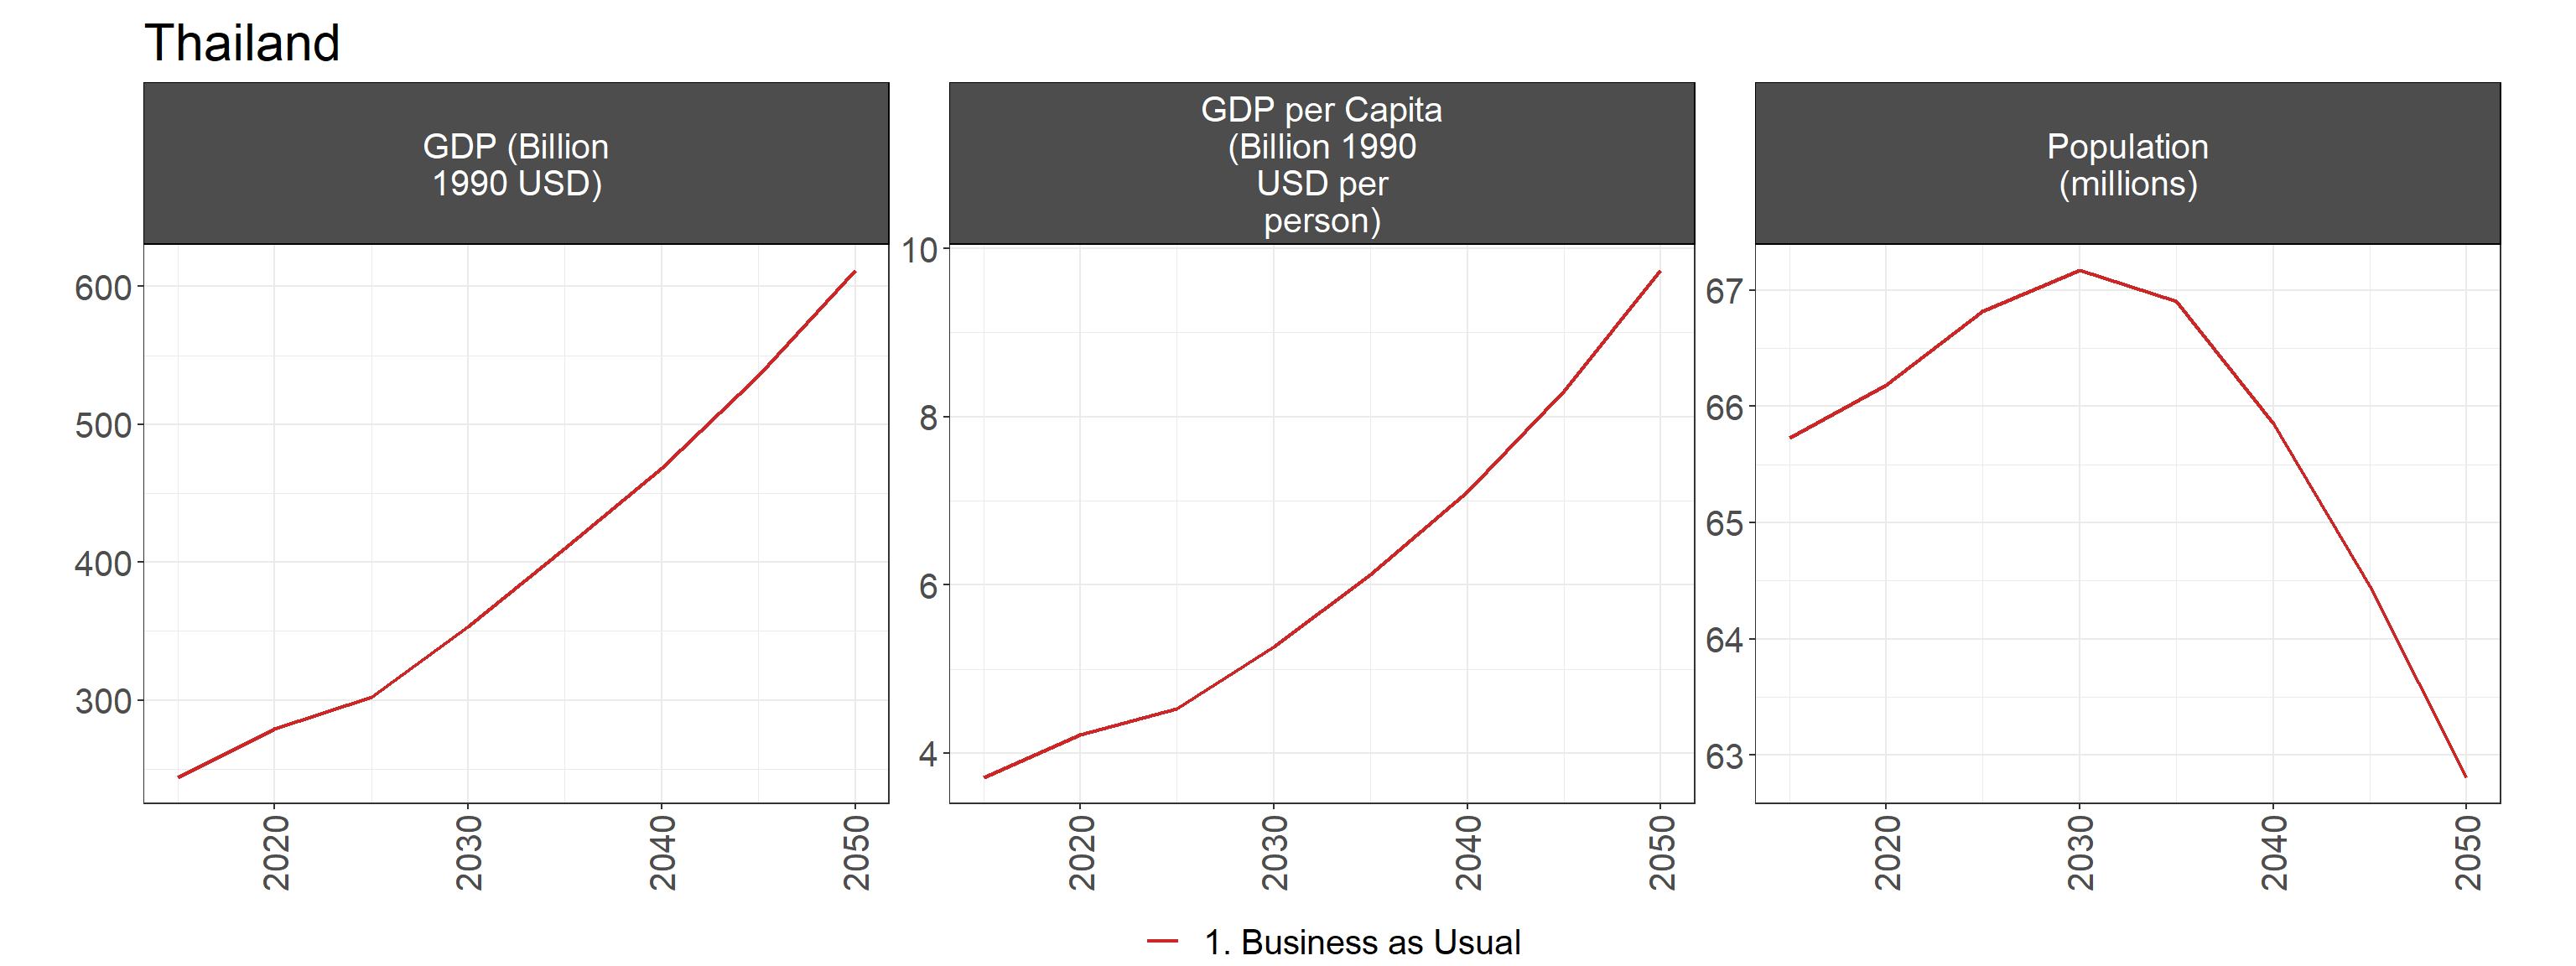 GDP, per capita GDP, and population in Thailand from 2020 to 2065. Only the BAU scenario is shown since socioeconomic assumptions are consistent between scenarios.